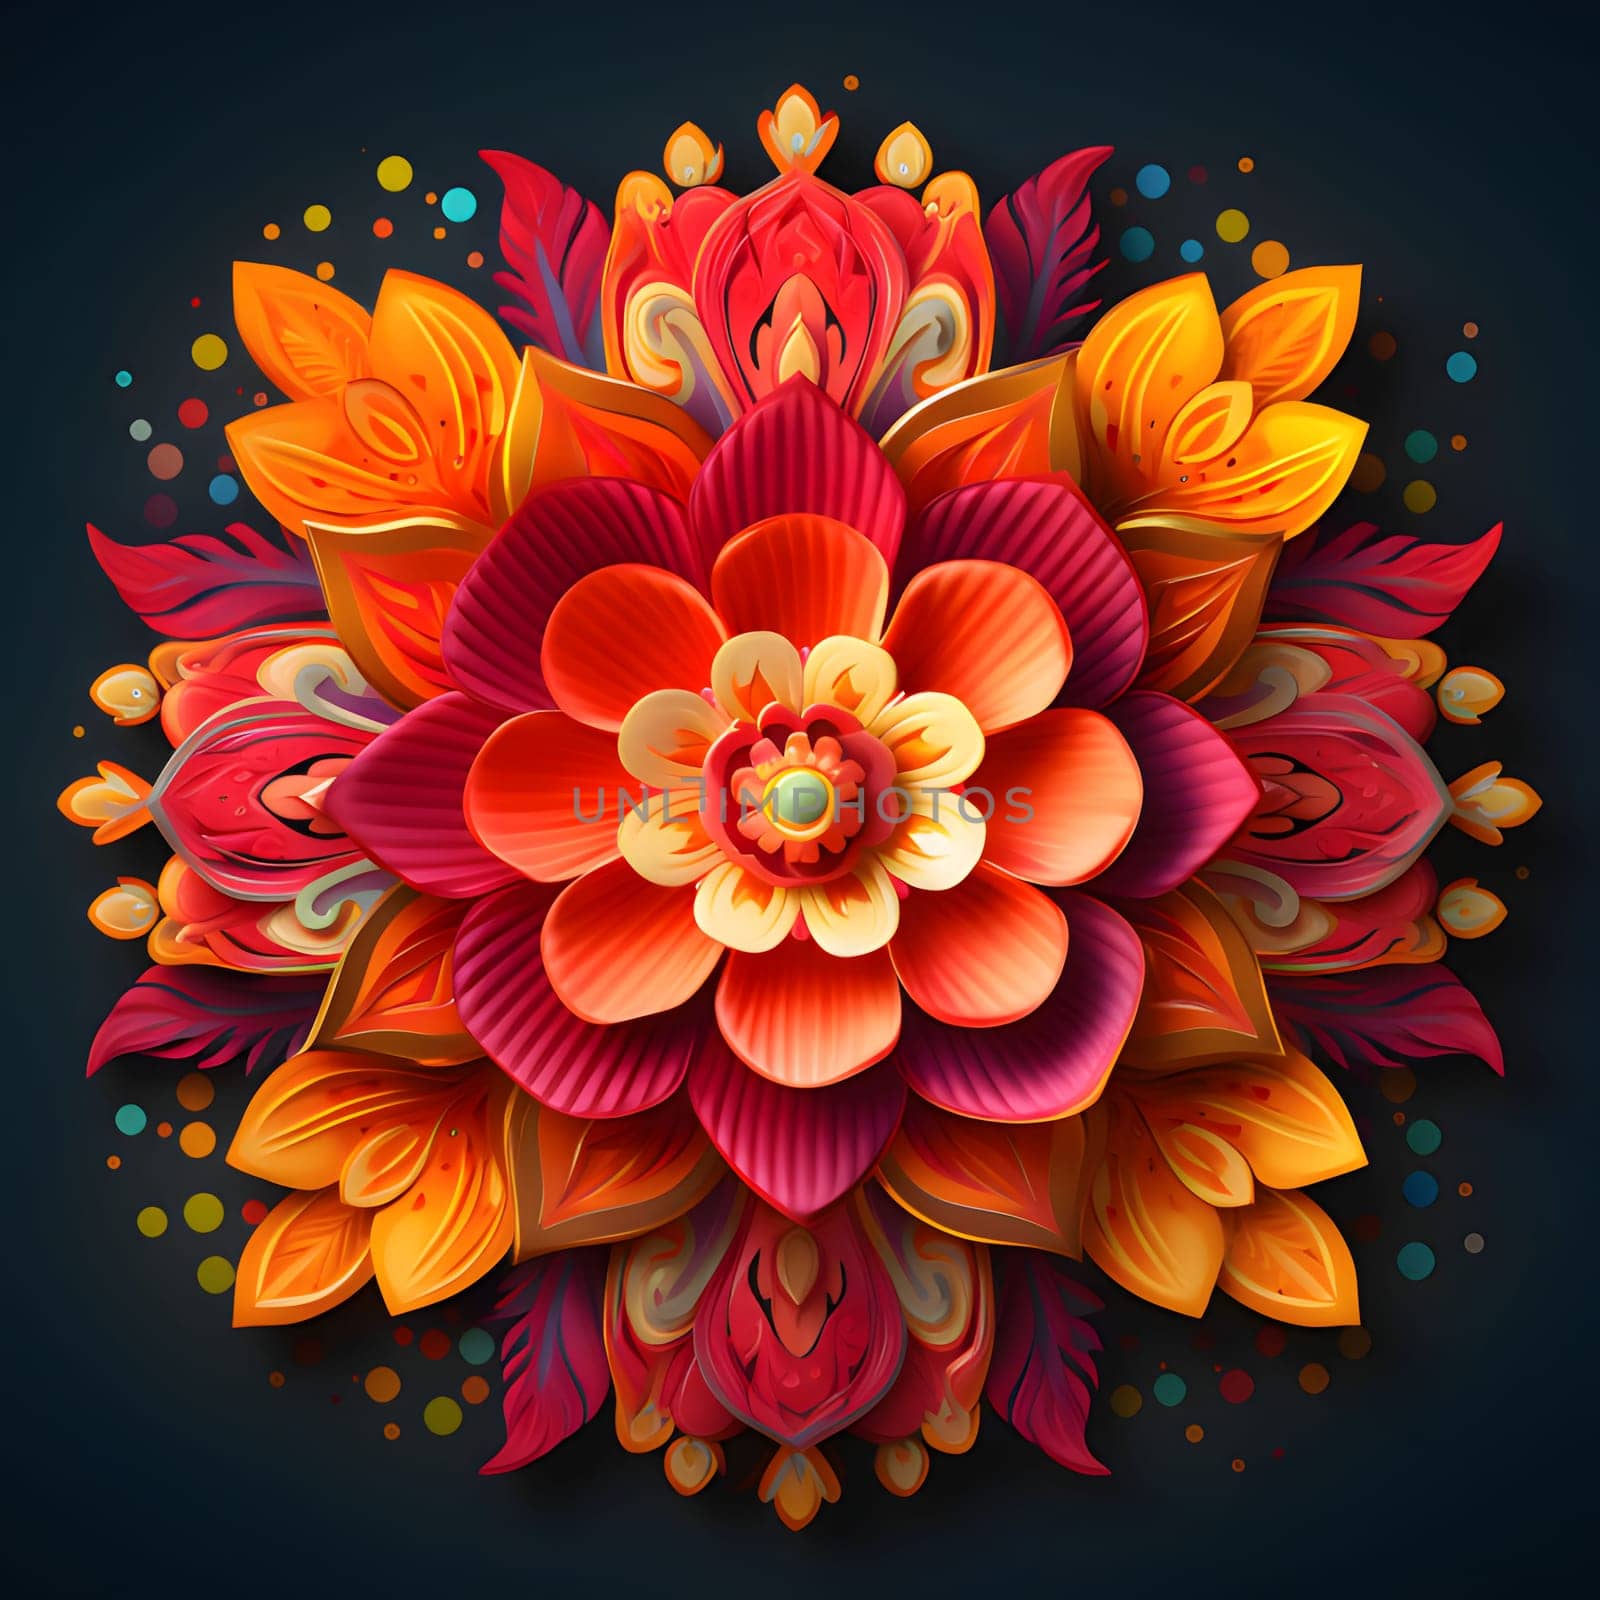 Colorful, elegantly arranged Lotus flower on a dark, solid 3D background. Diwali, the dipawali Indian festival of light. An atmosphere of joy and celebration.